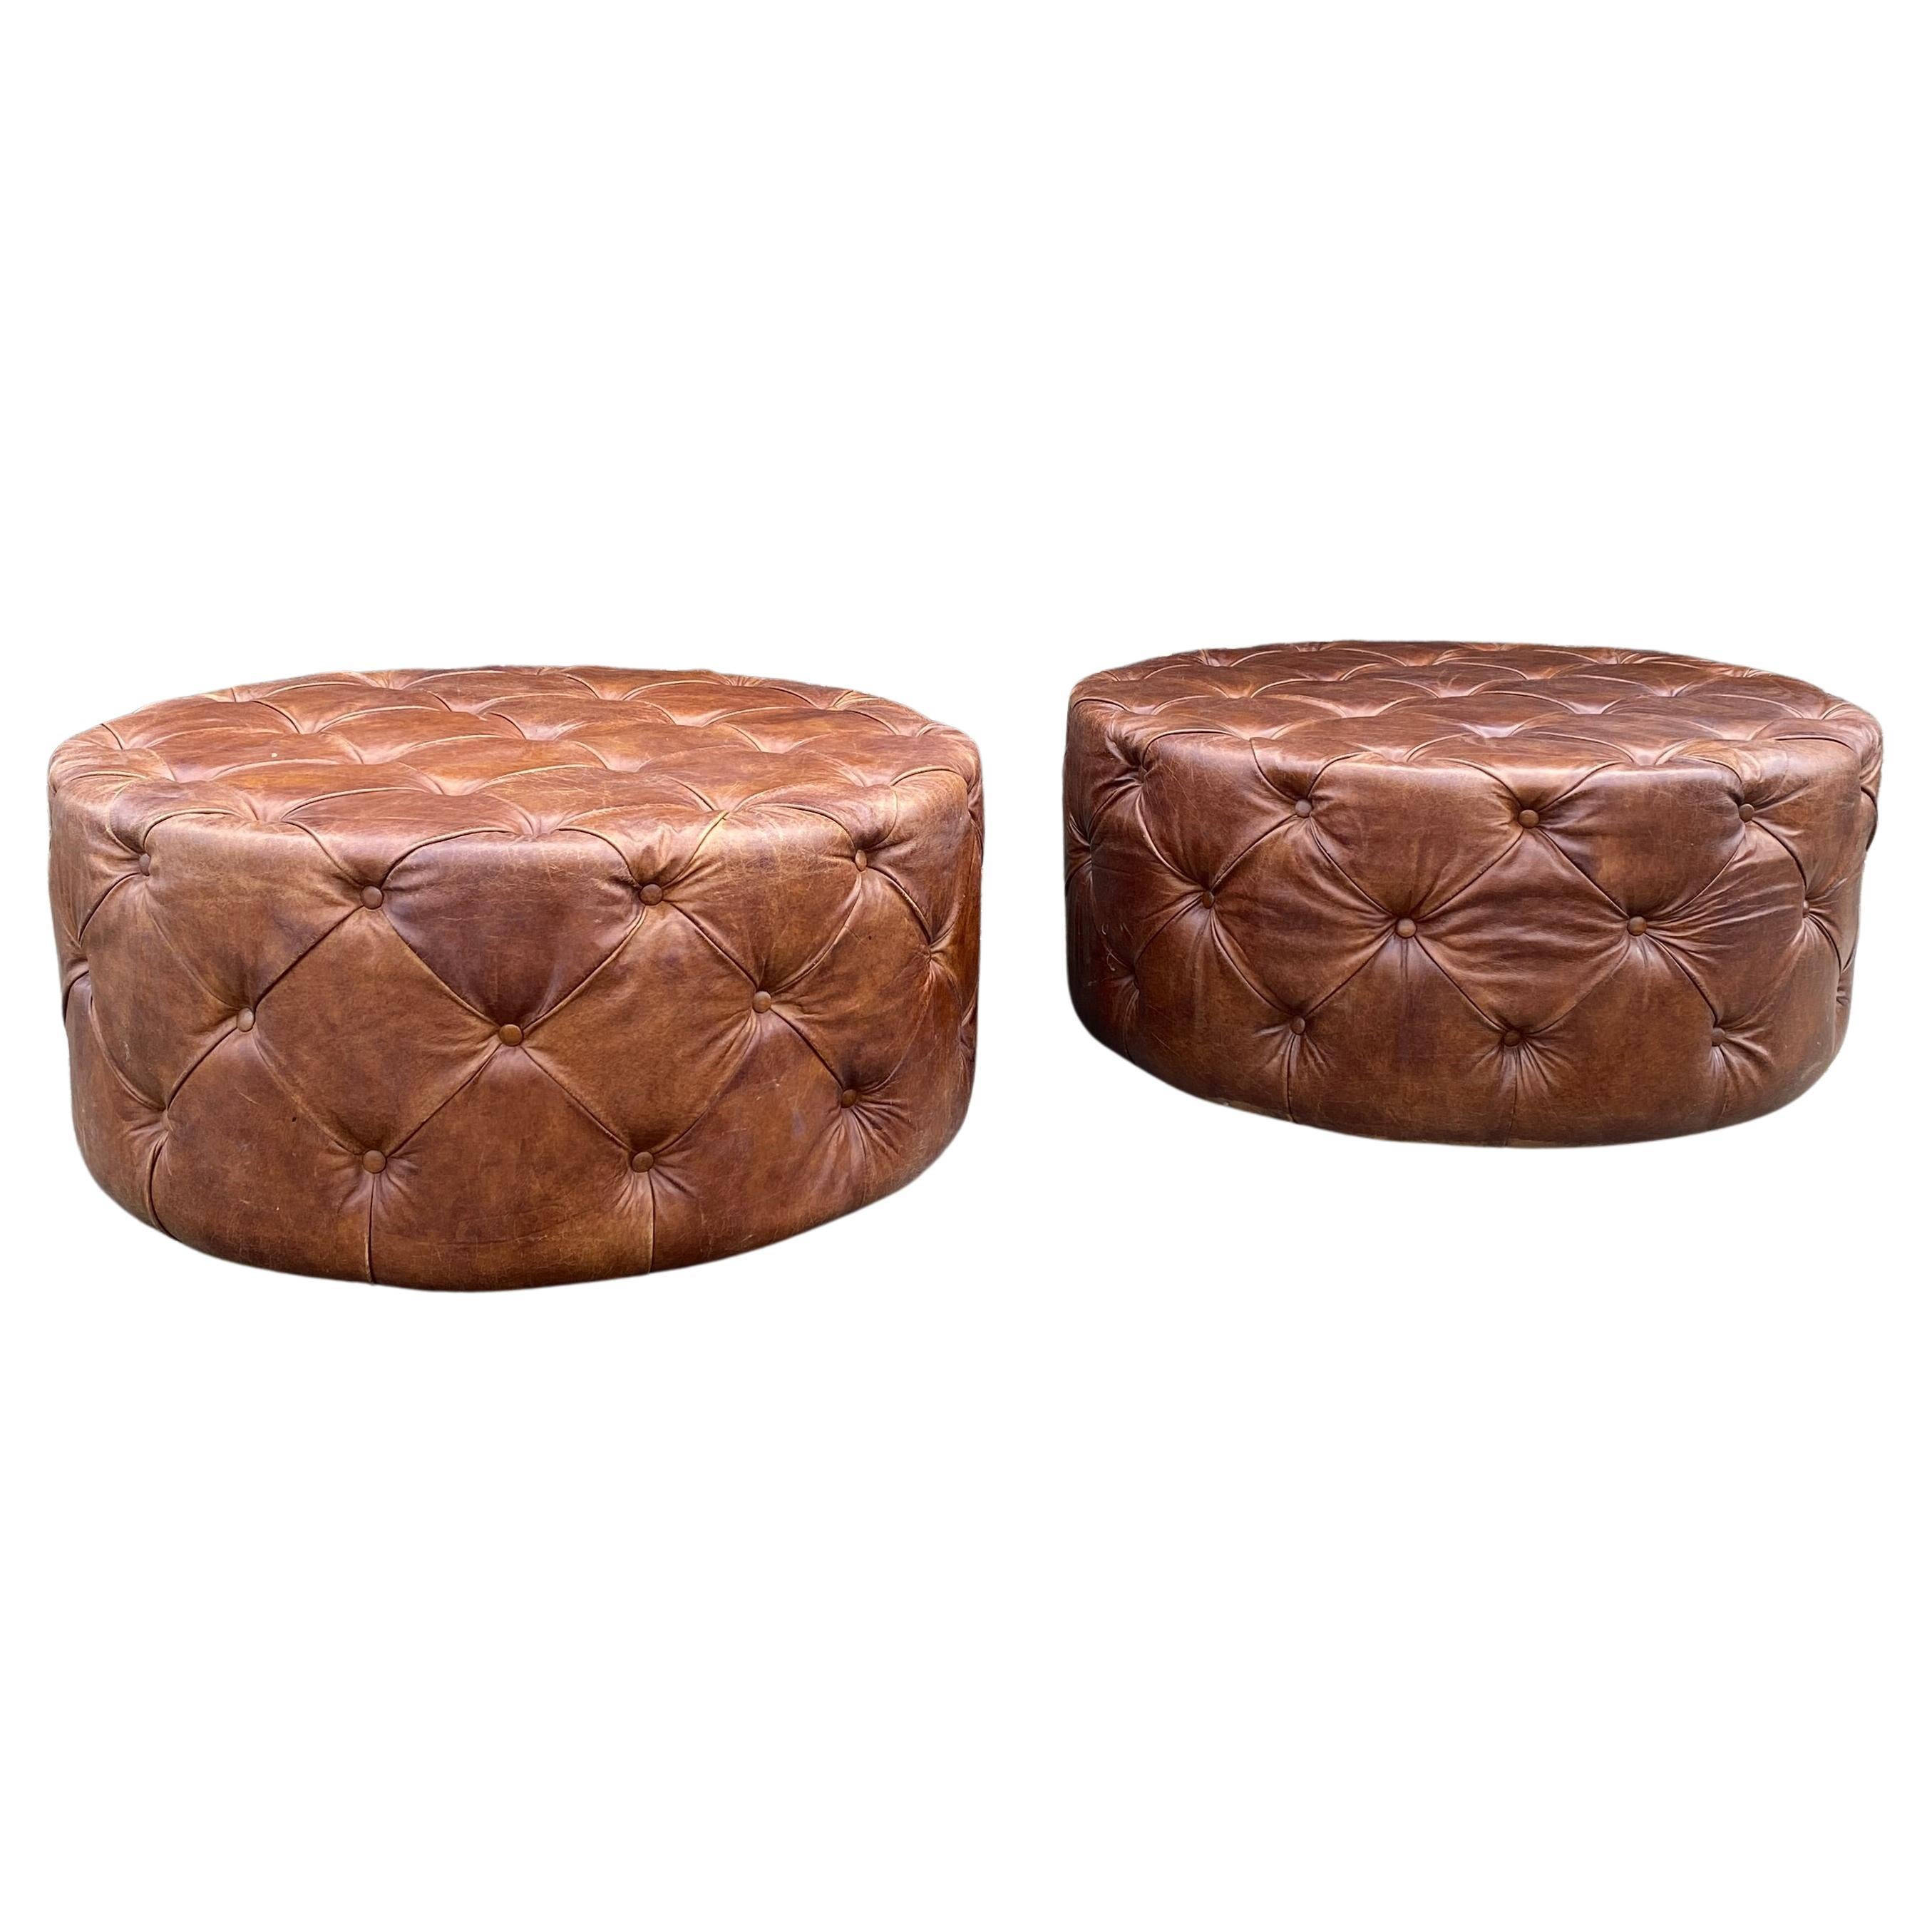 Pair of Large Round Leather Rotating Buttoned Ottoman  Tufted Coffee Table